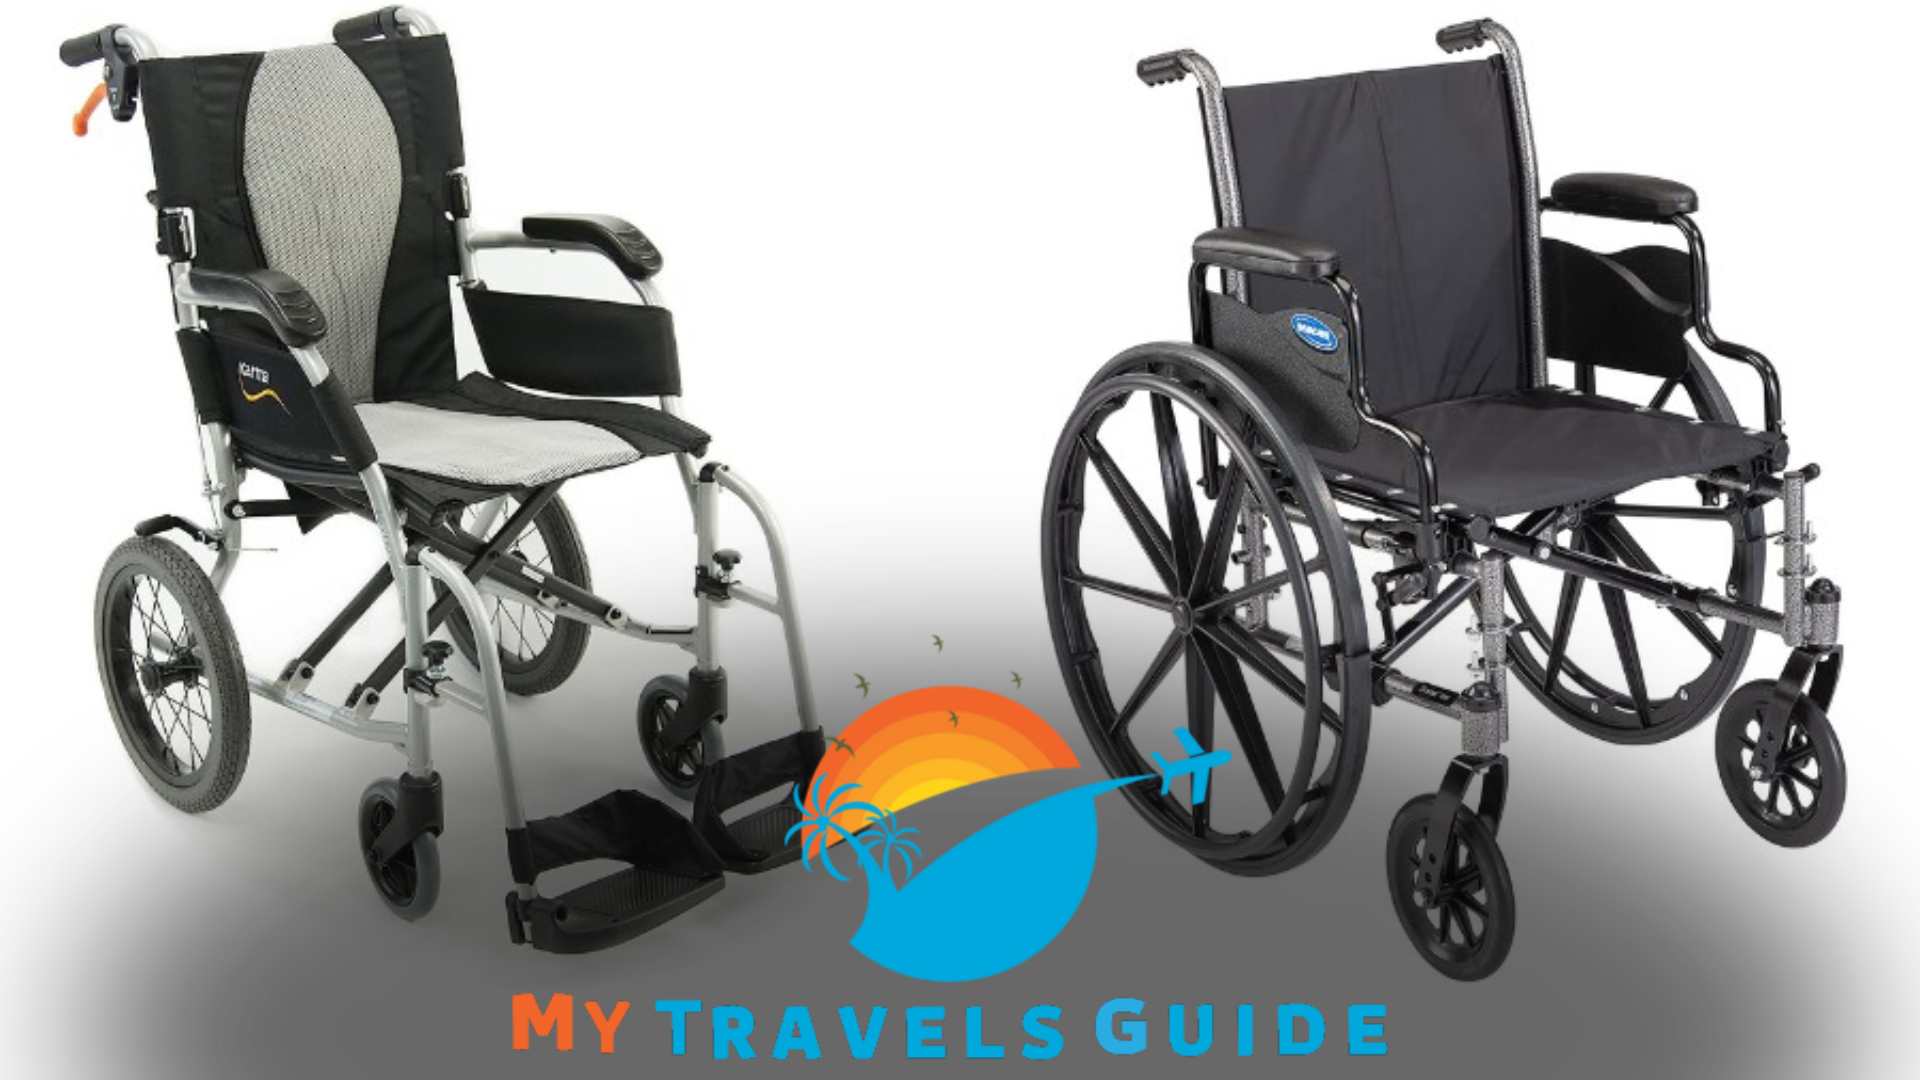 Wheelchair Stroller for Adults: Enhancing Mobility and Independence